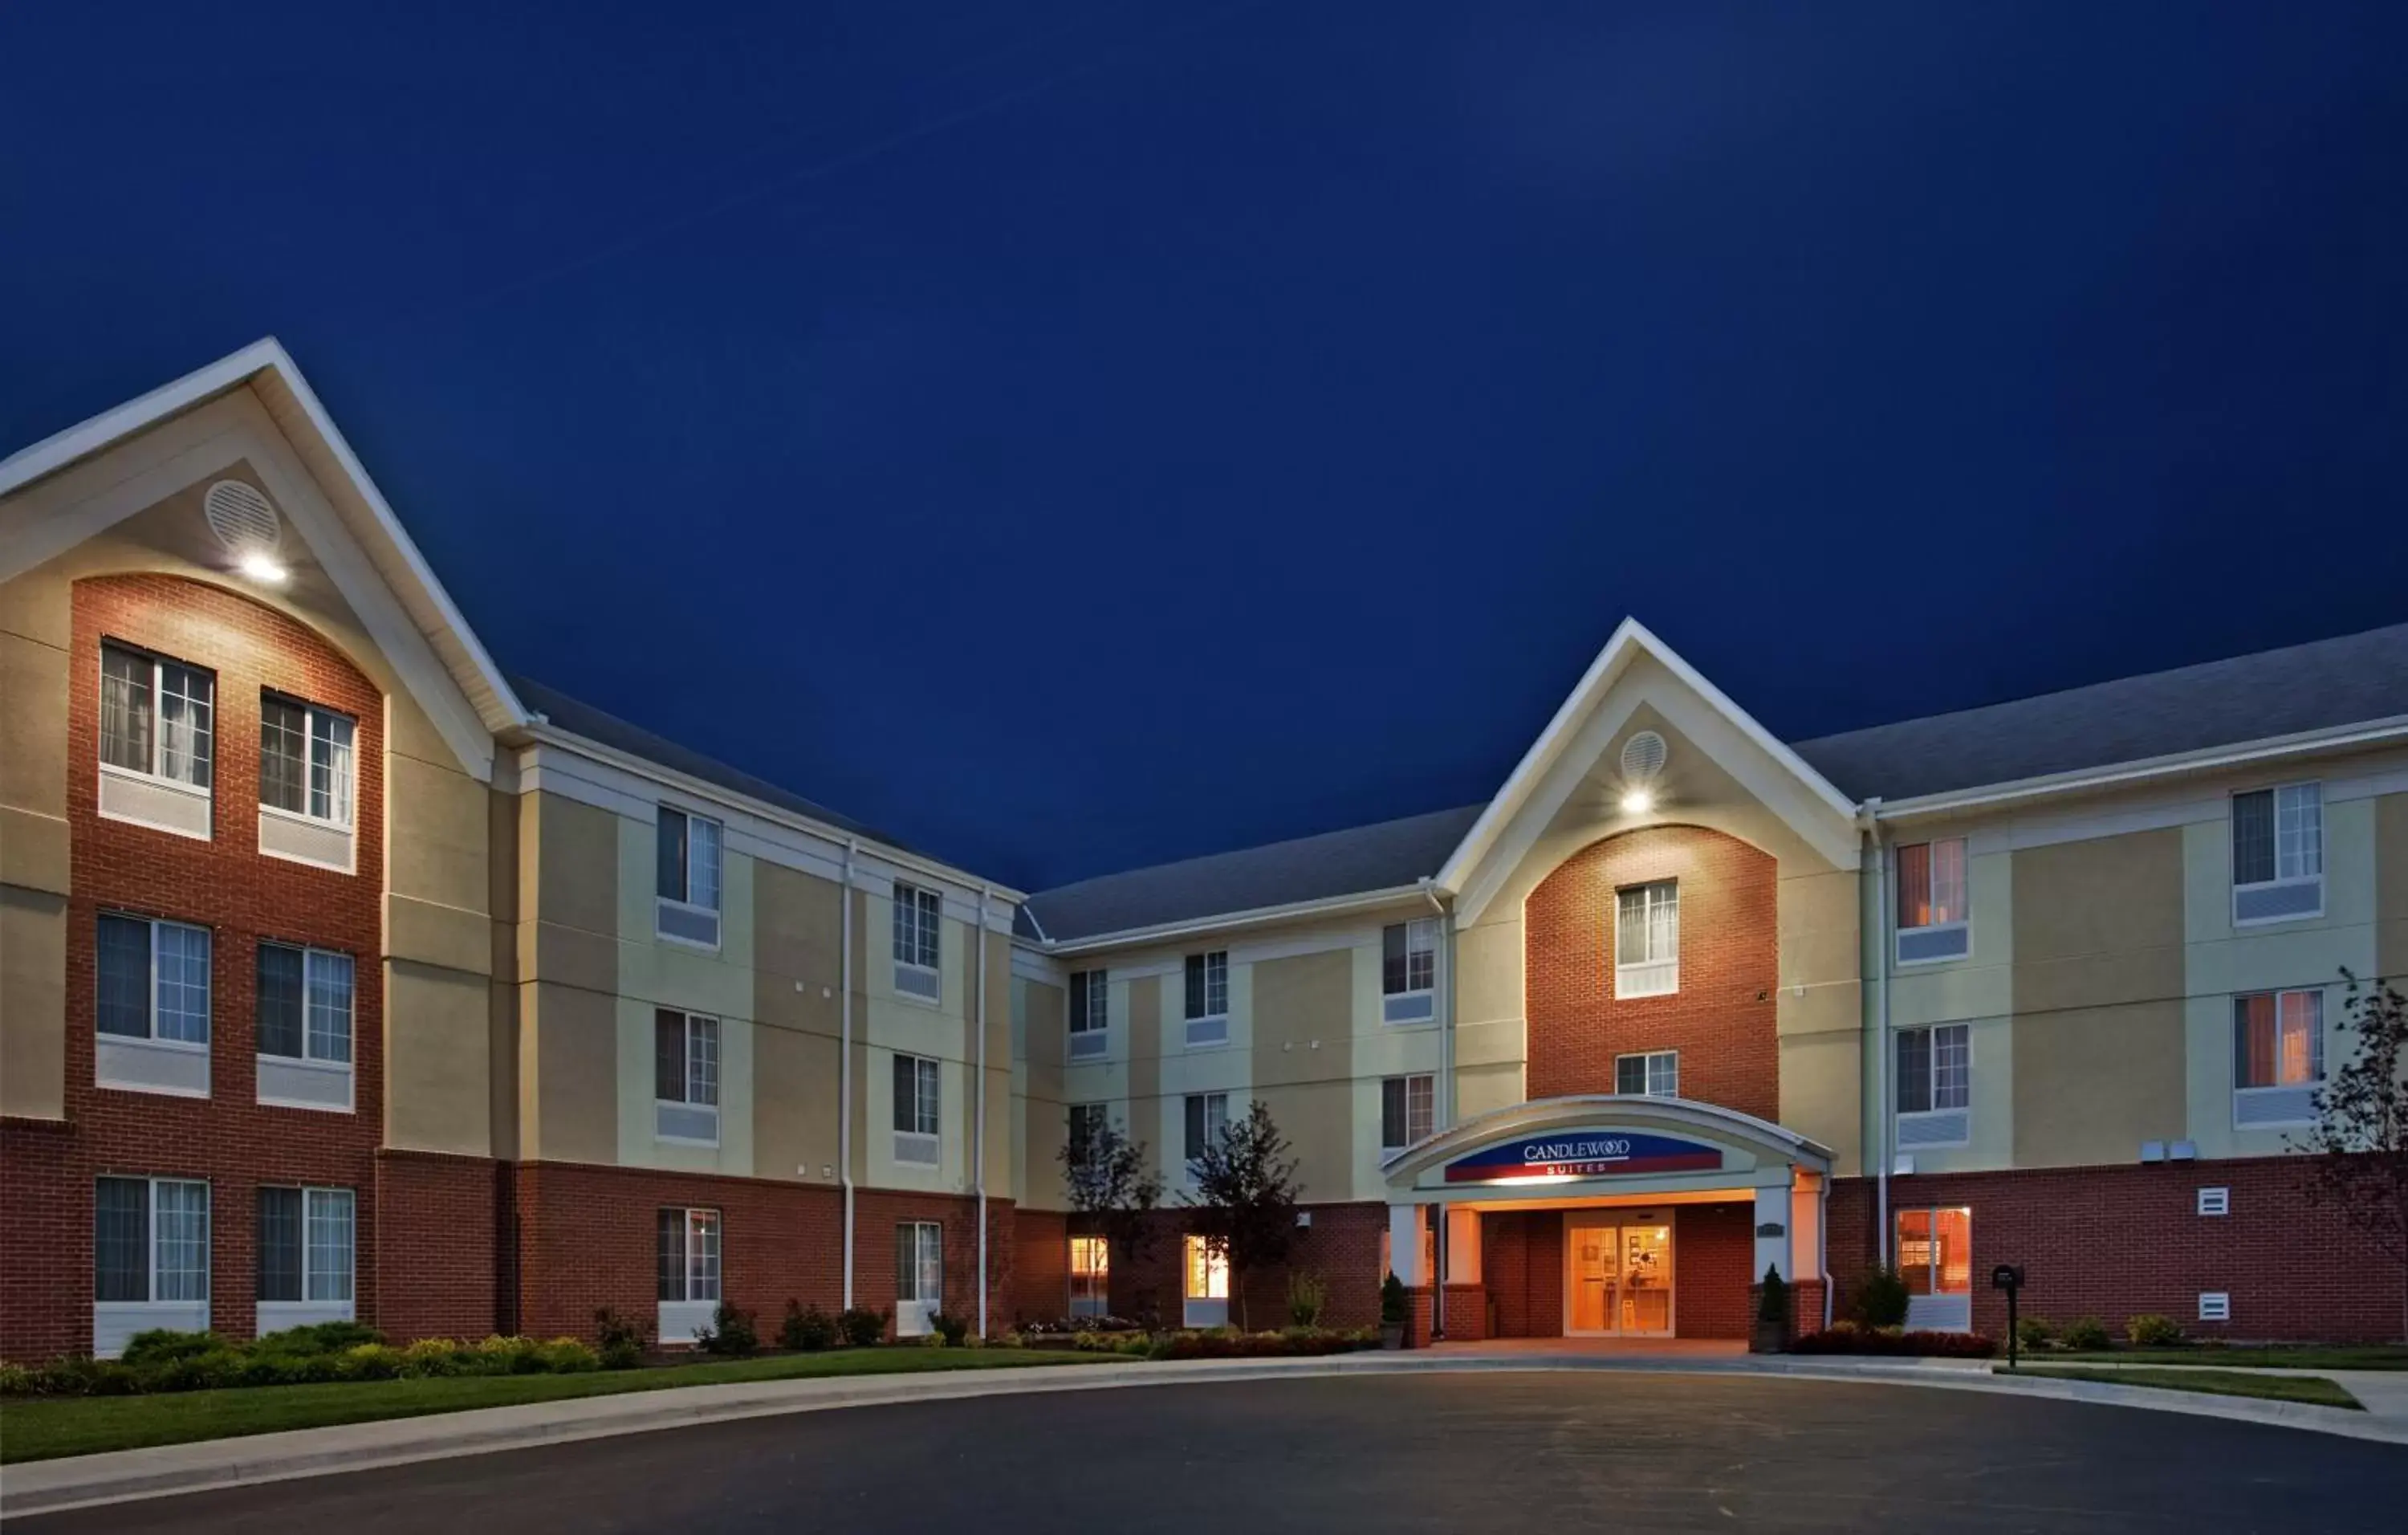 Property Building in Candlewood Suites Kansas City, an IHG Hotel